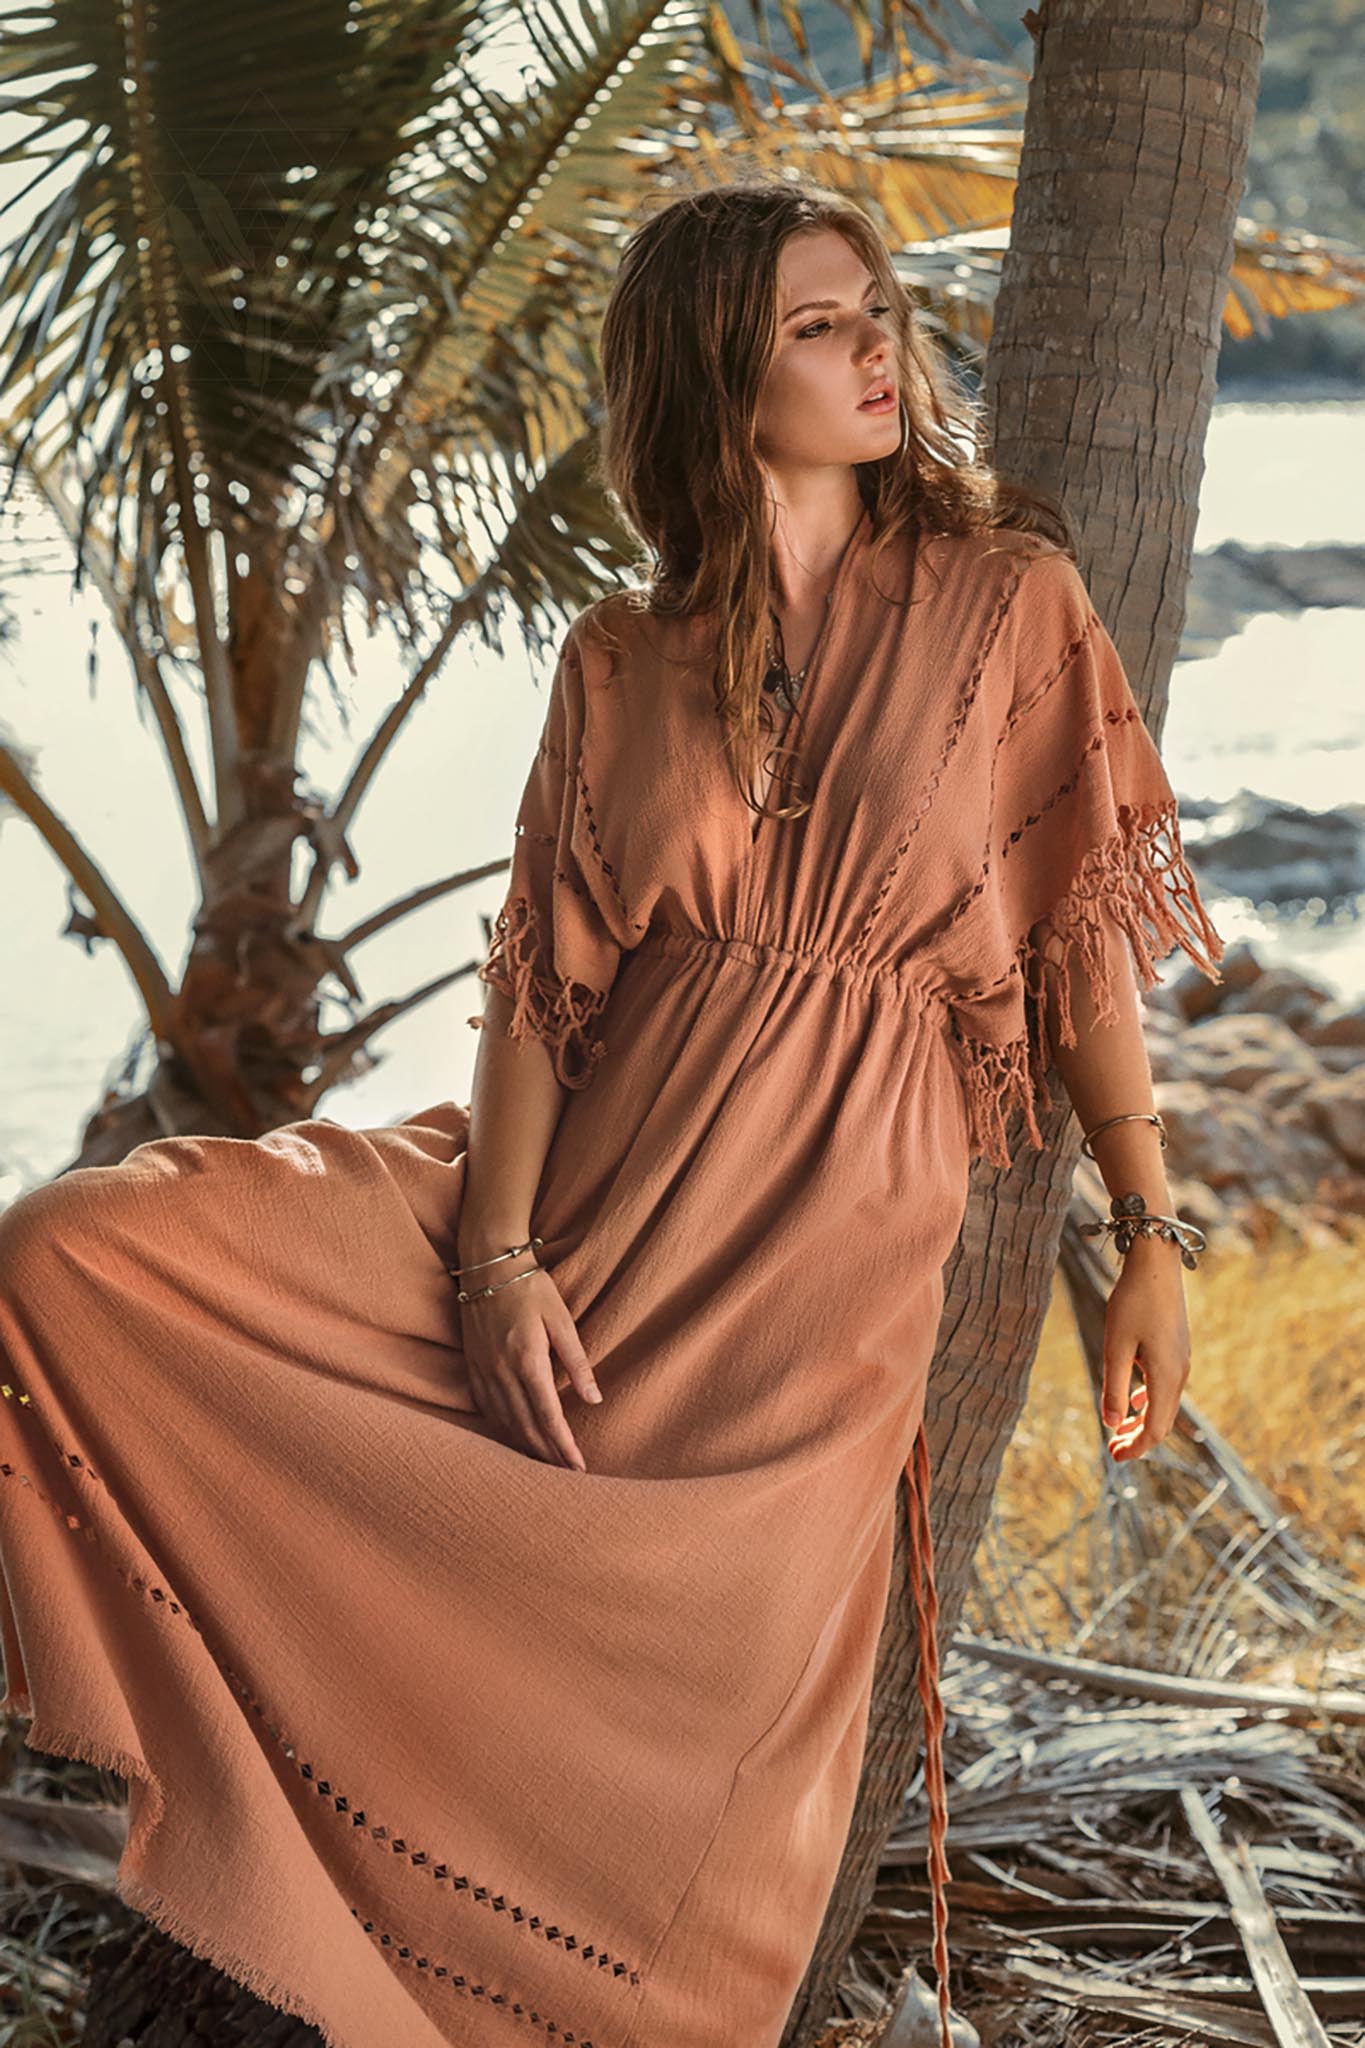 This is a great dress for a summer day at the beach. The light fabric and loose fit will keep you cool and comfortable, and the orange colour will make you feel like you're in the sun. 